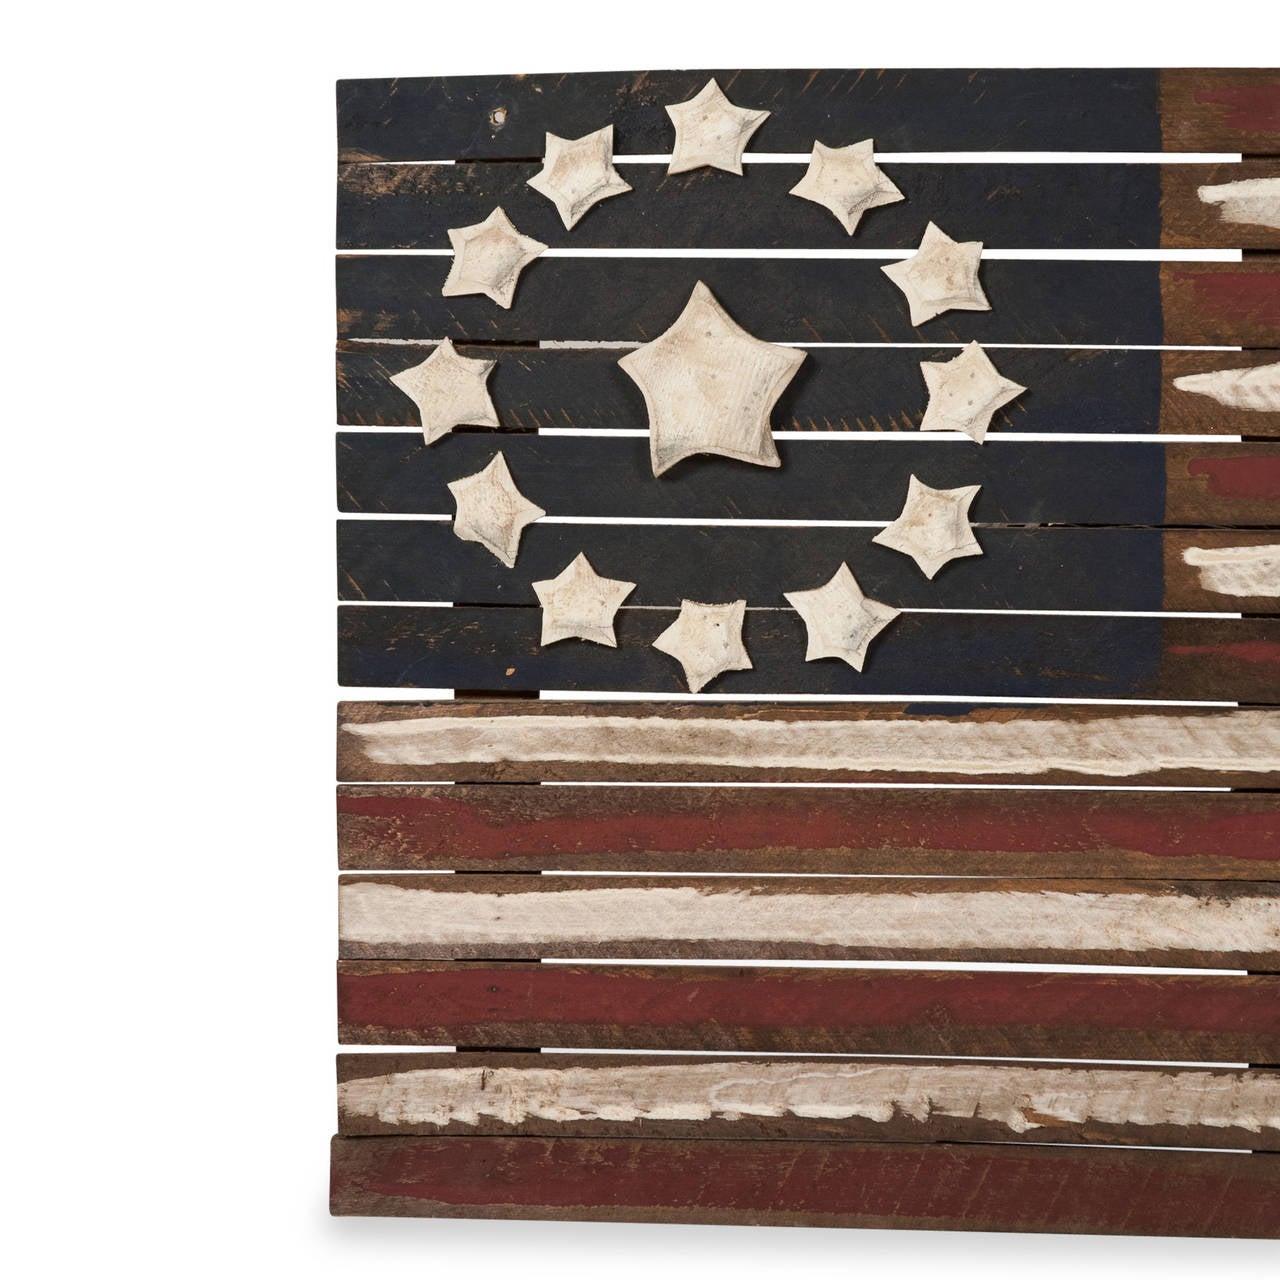 Painted Folk Art scrap wood American flag, with applied cut wood stars in a ring around a larger center star, American, late 20th century. Dimensions: 32 x 19 in, depth 2 in. (Item #2309)